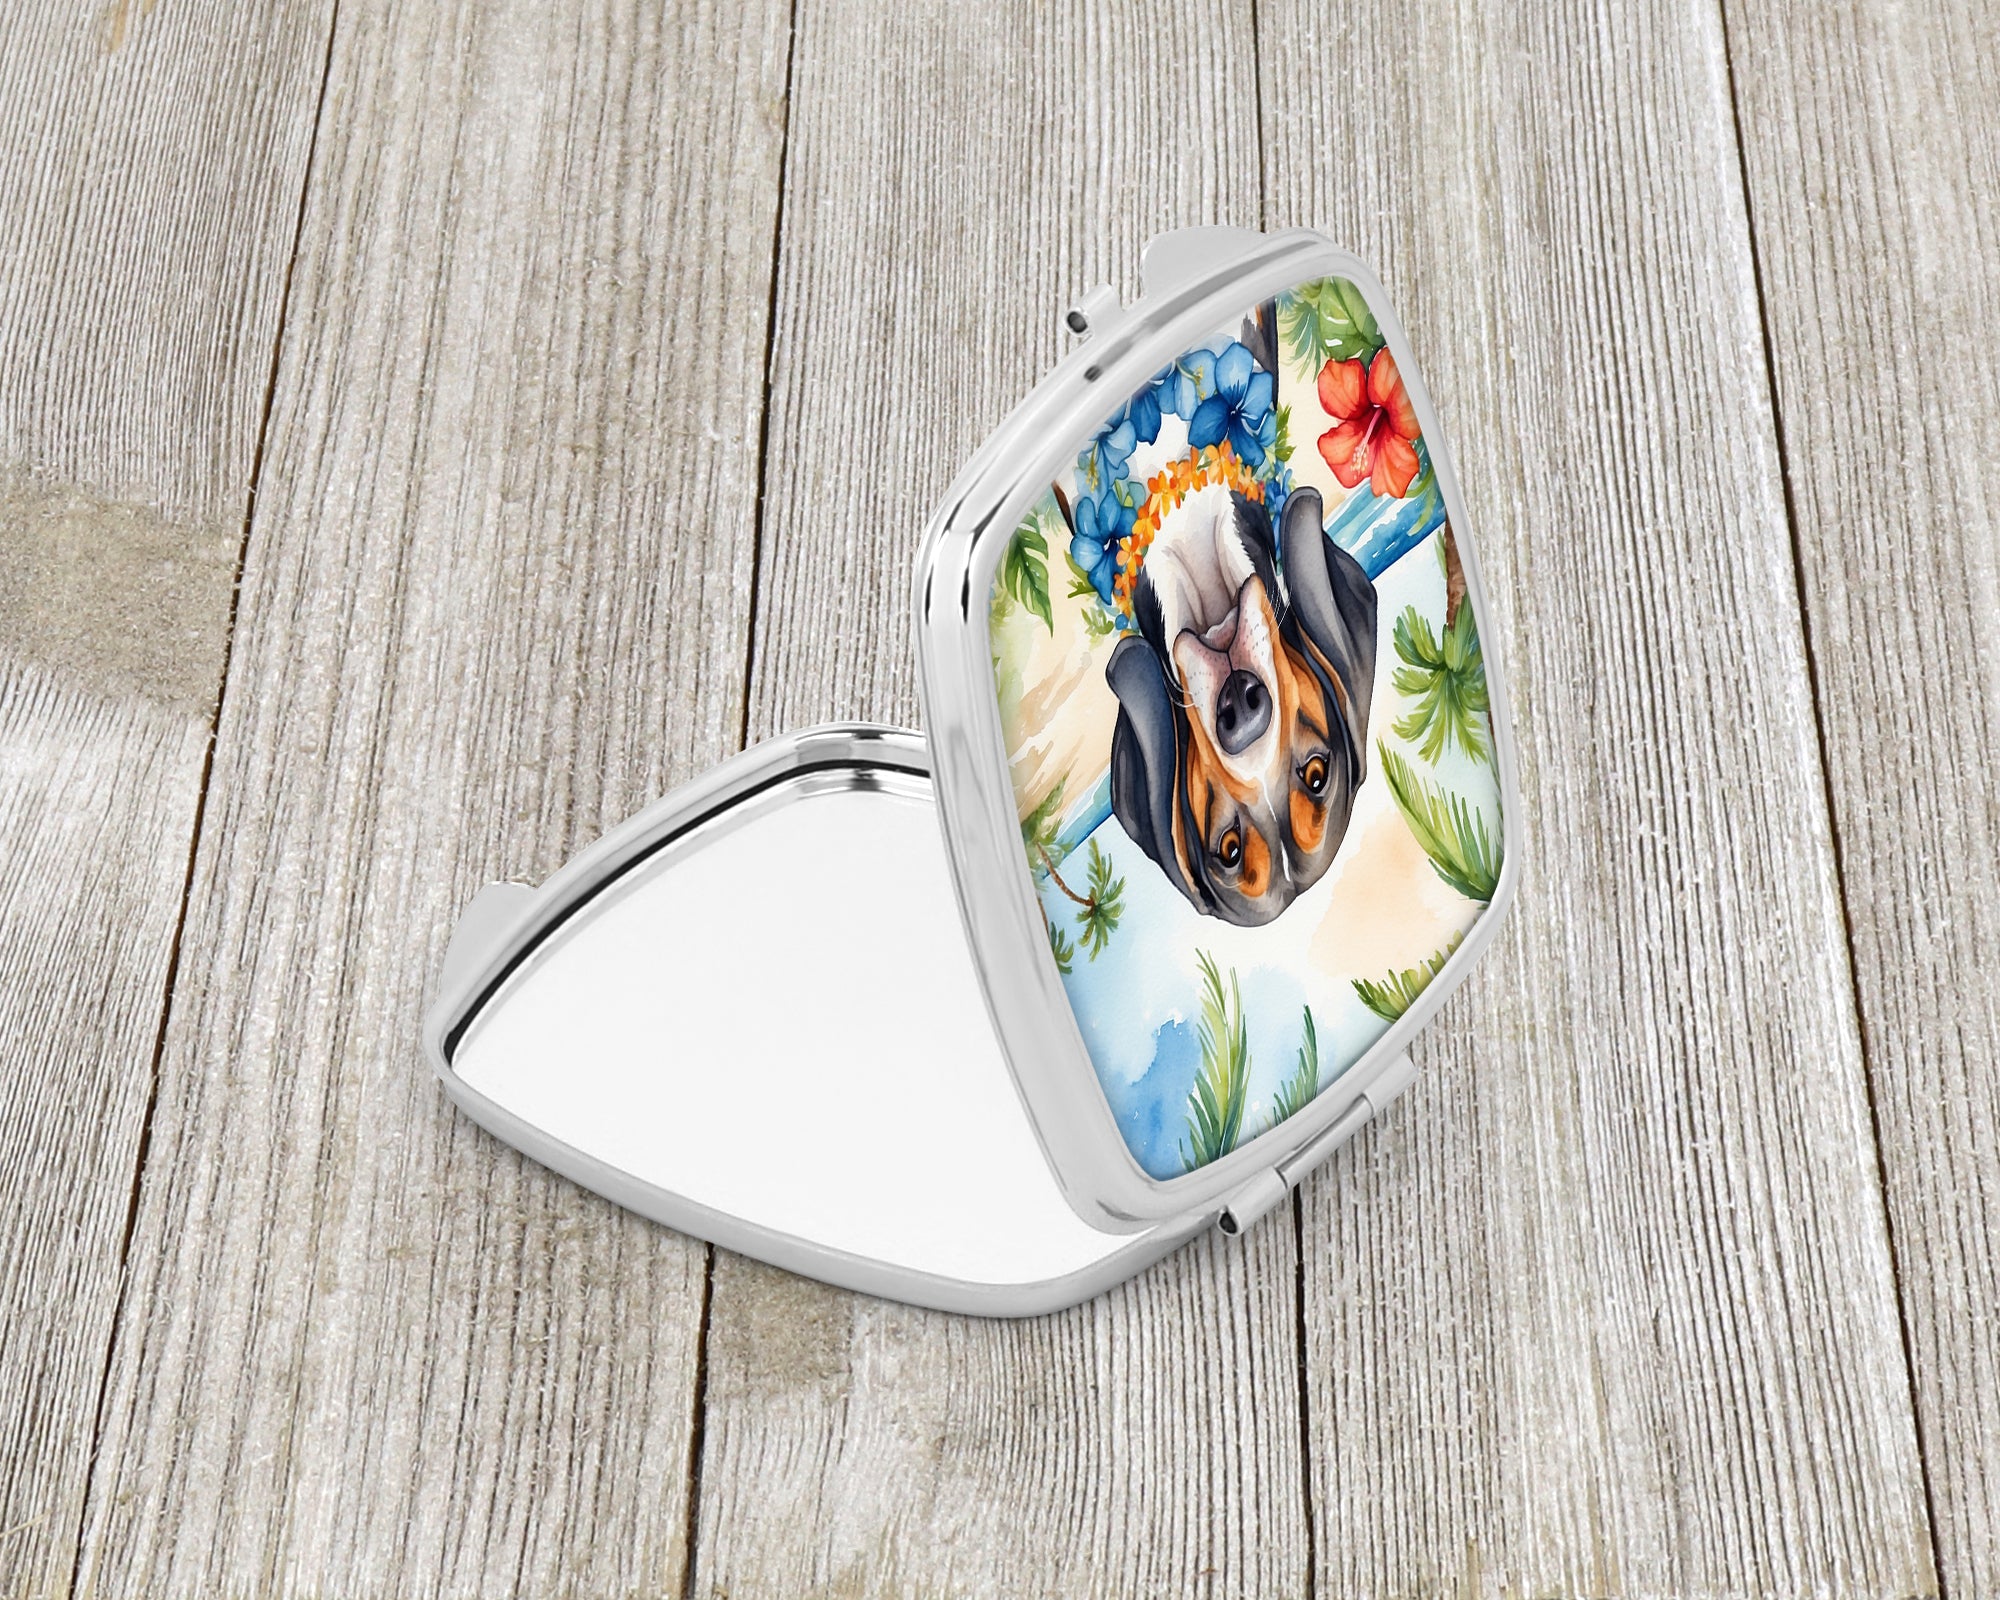 Buy this American English Coonhound Luau Compact Mirror